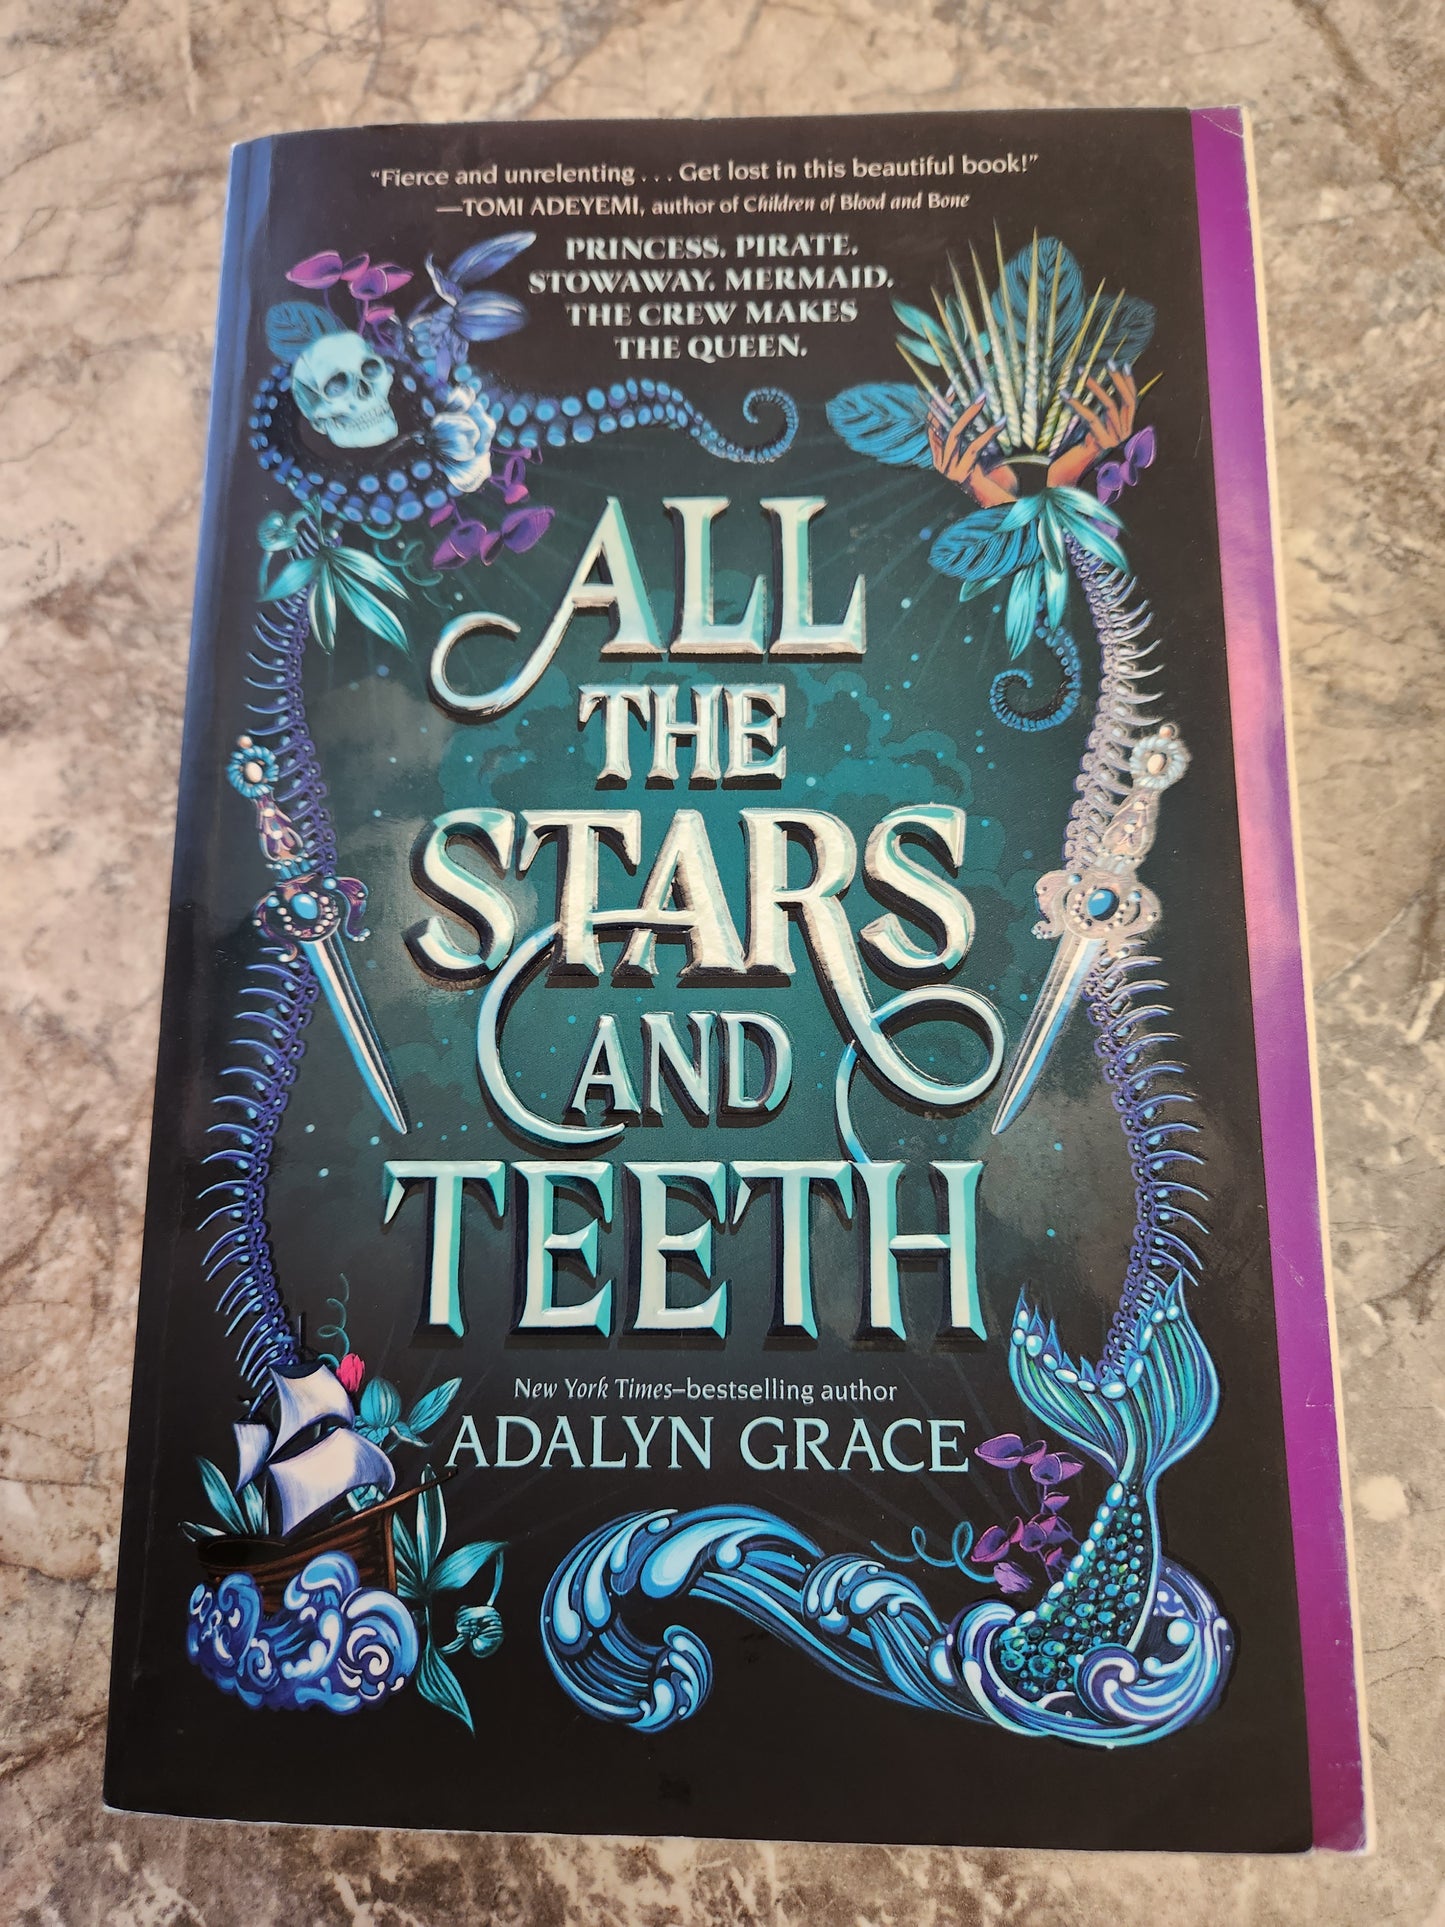 All Stars and Teeth by Adalyn Grace